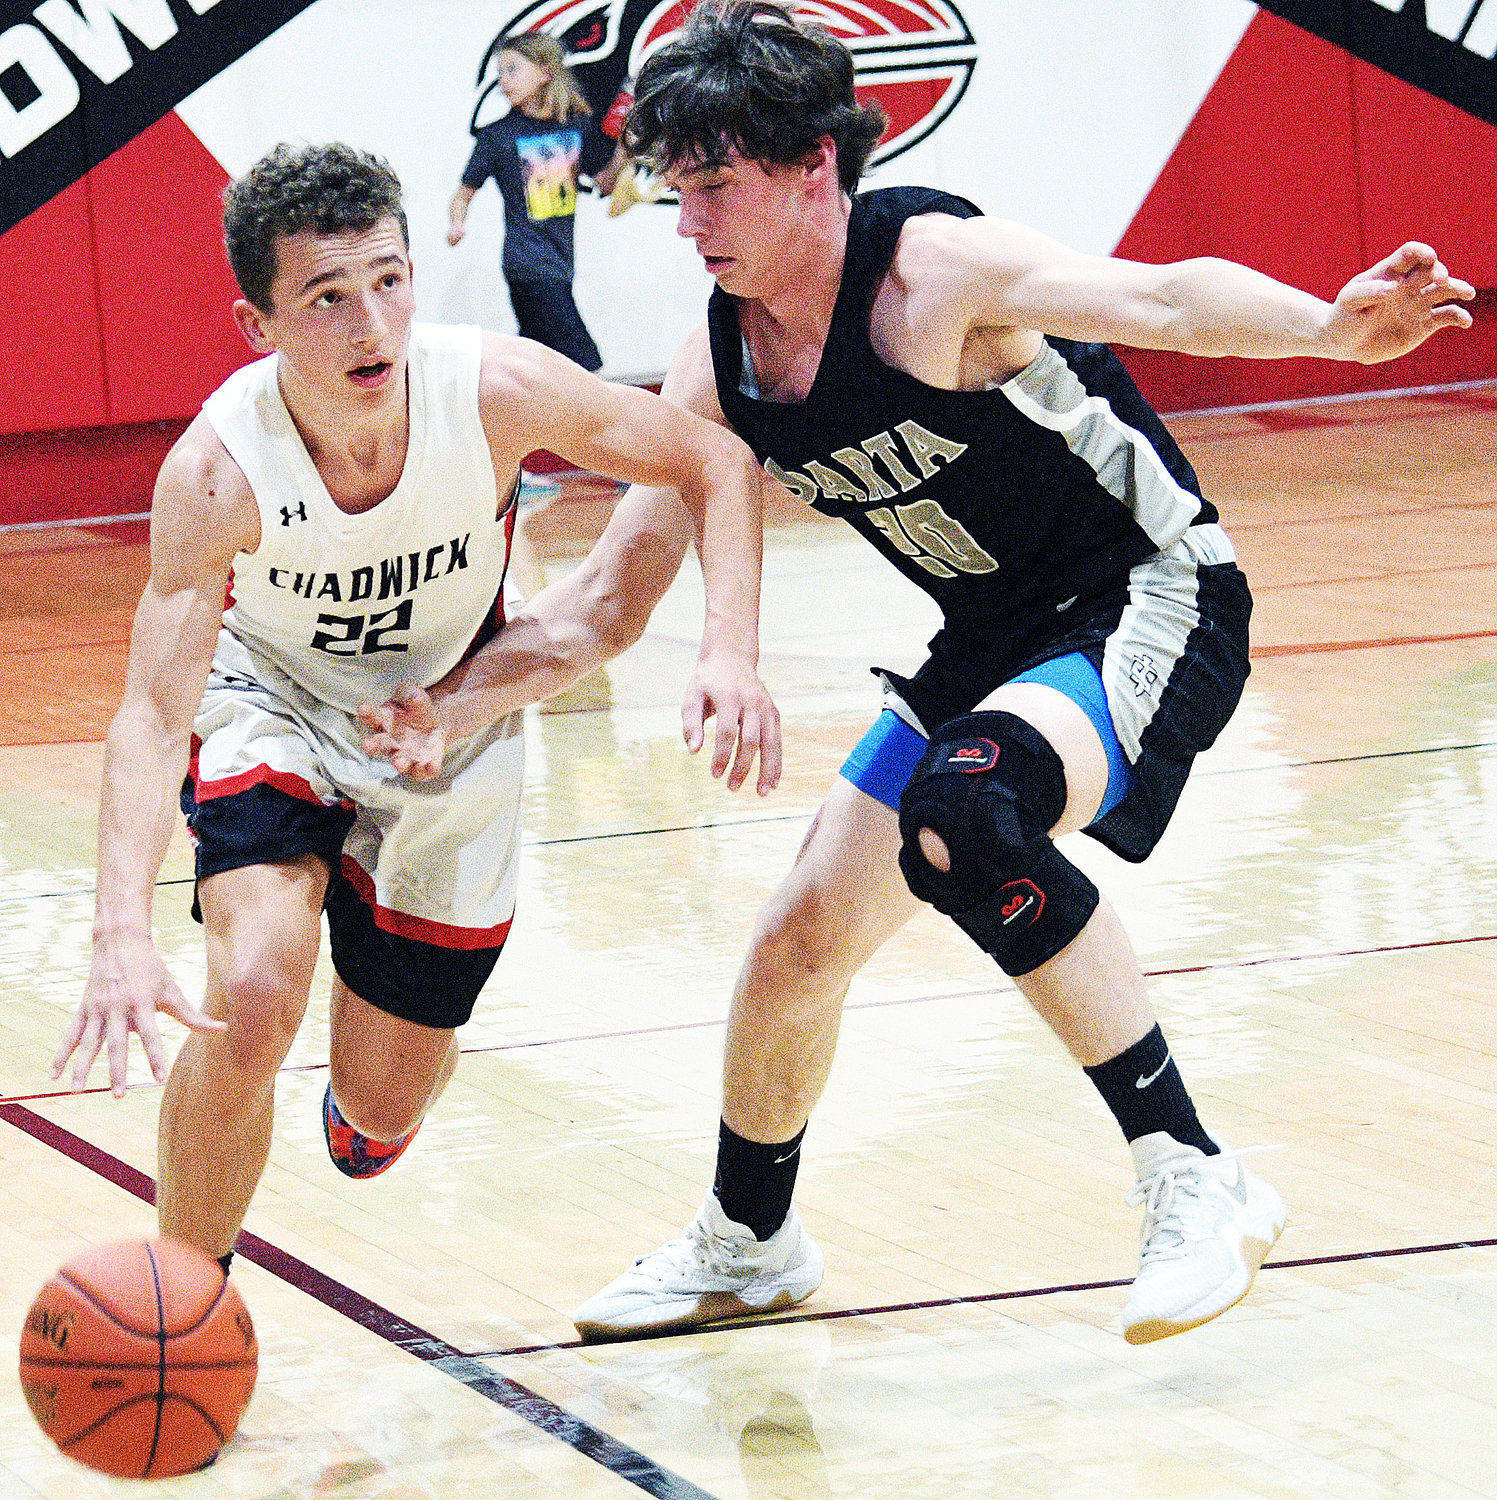 CHADWICK’S TRISTAN SMITH drives while defended by Sparta’s Steven Brown on Tuesday.